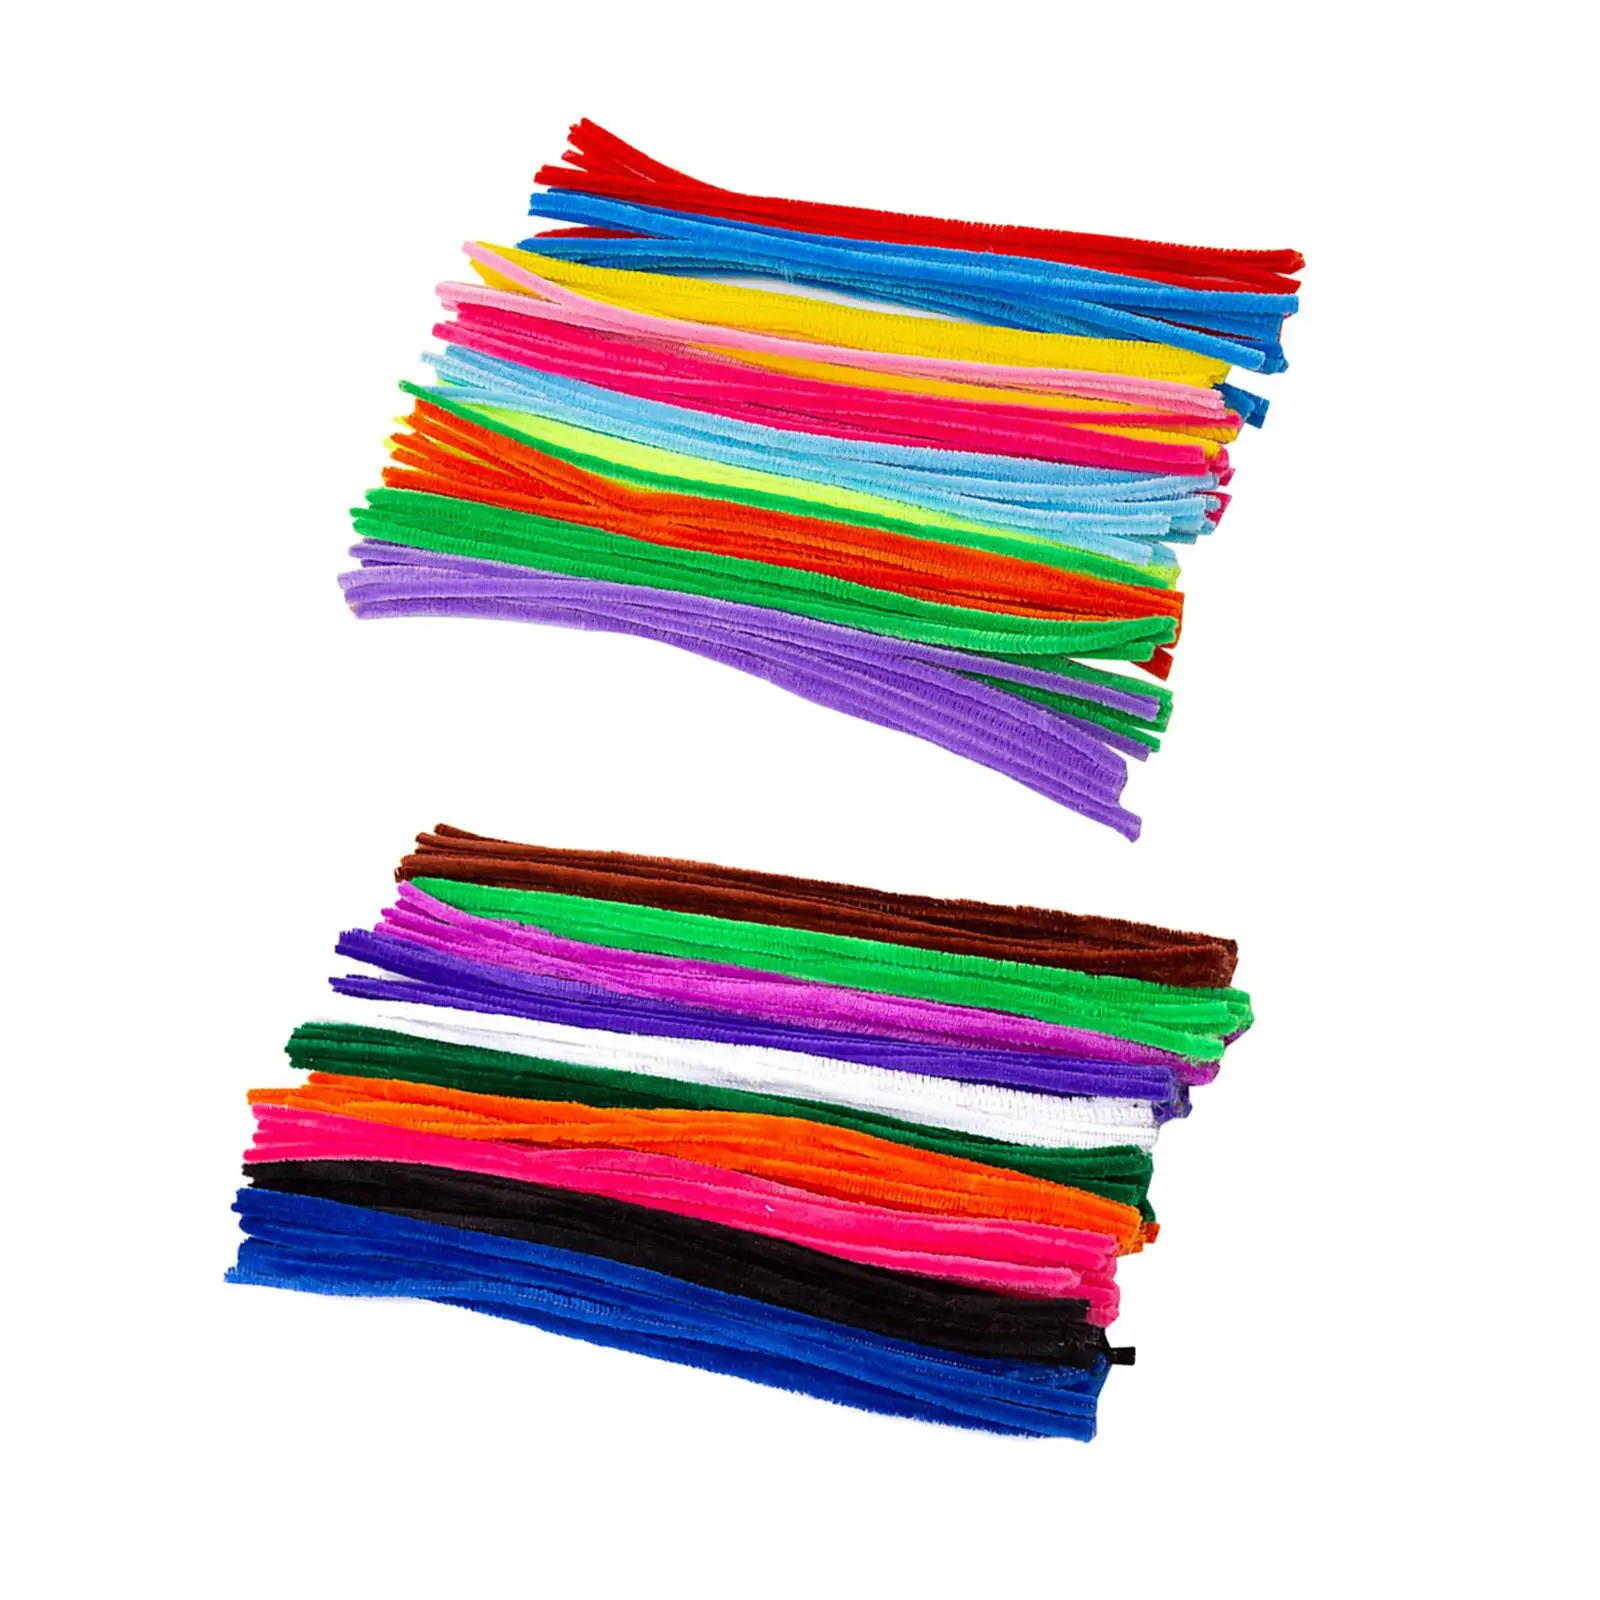 Multipurpose Twisting Bar Educational Toy Colorful Gifts Crafting Materials Soft Crafts Supplies for Preschool Holiday Beginner